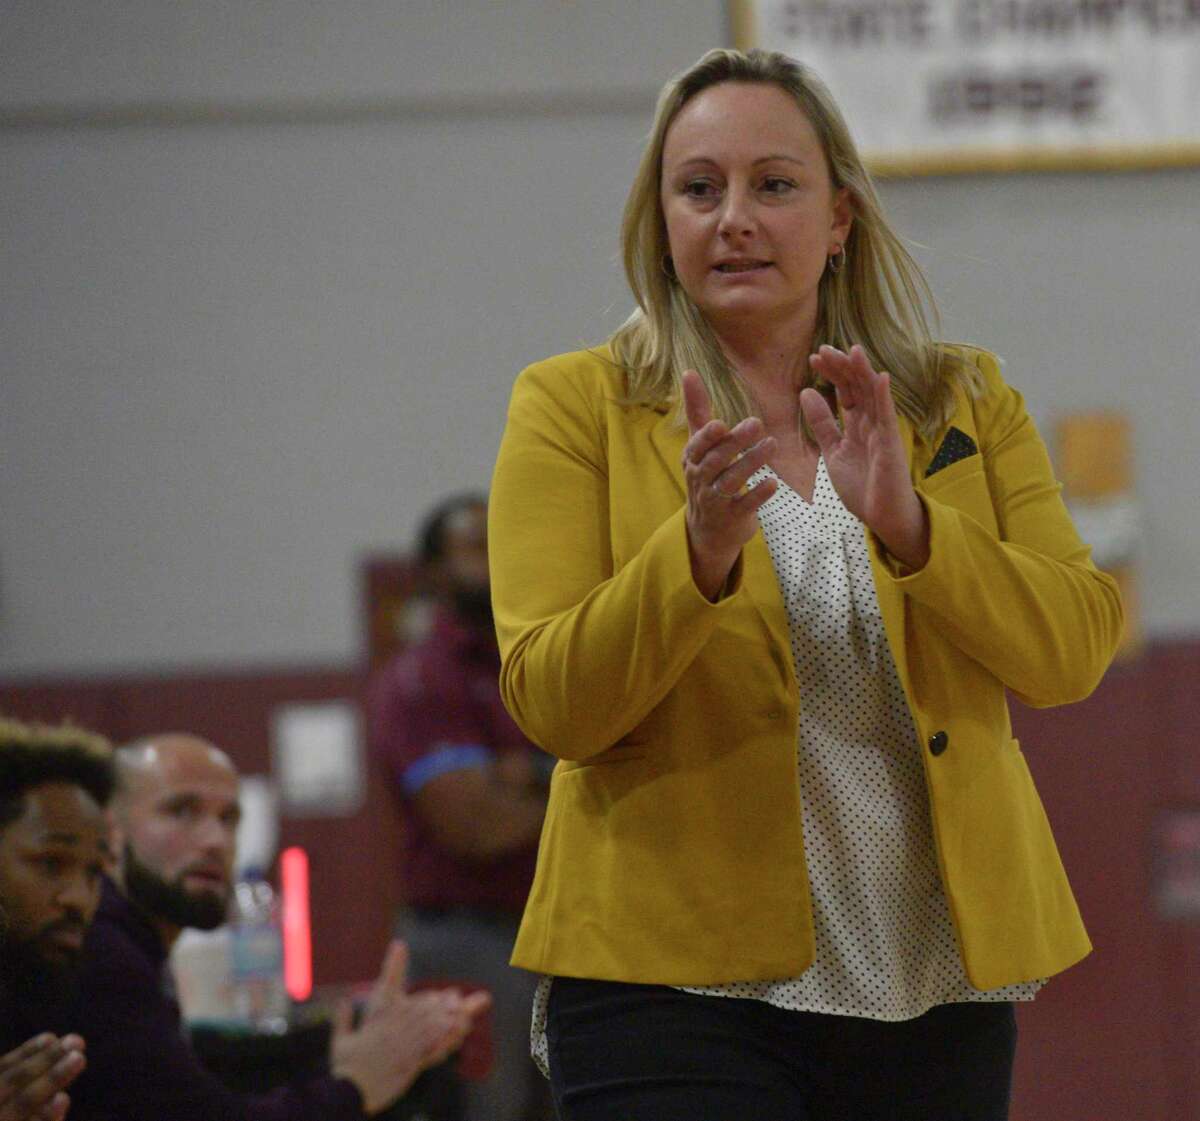 Maria Conlan has stepped down as coach at Notre Dame-Fairfield to take a job at Greens Farms Academy.